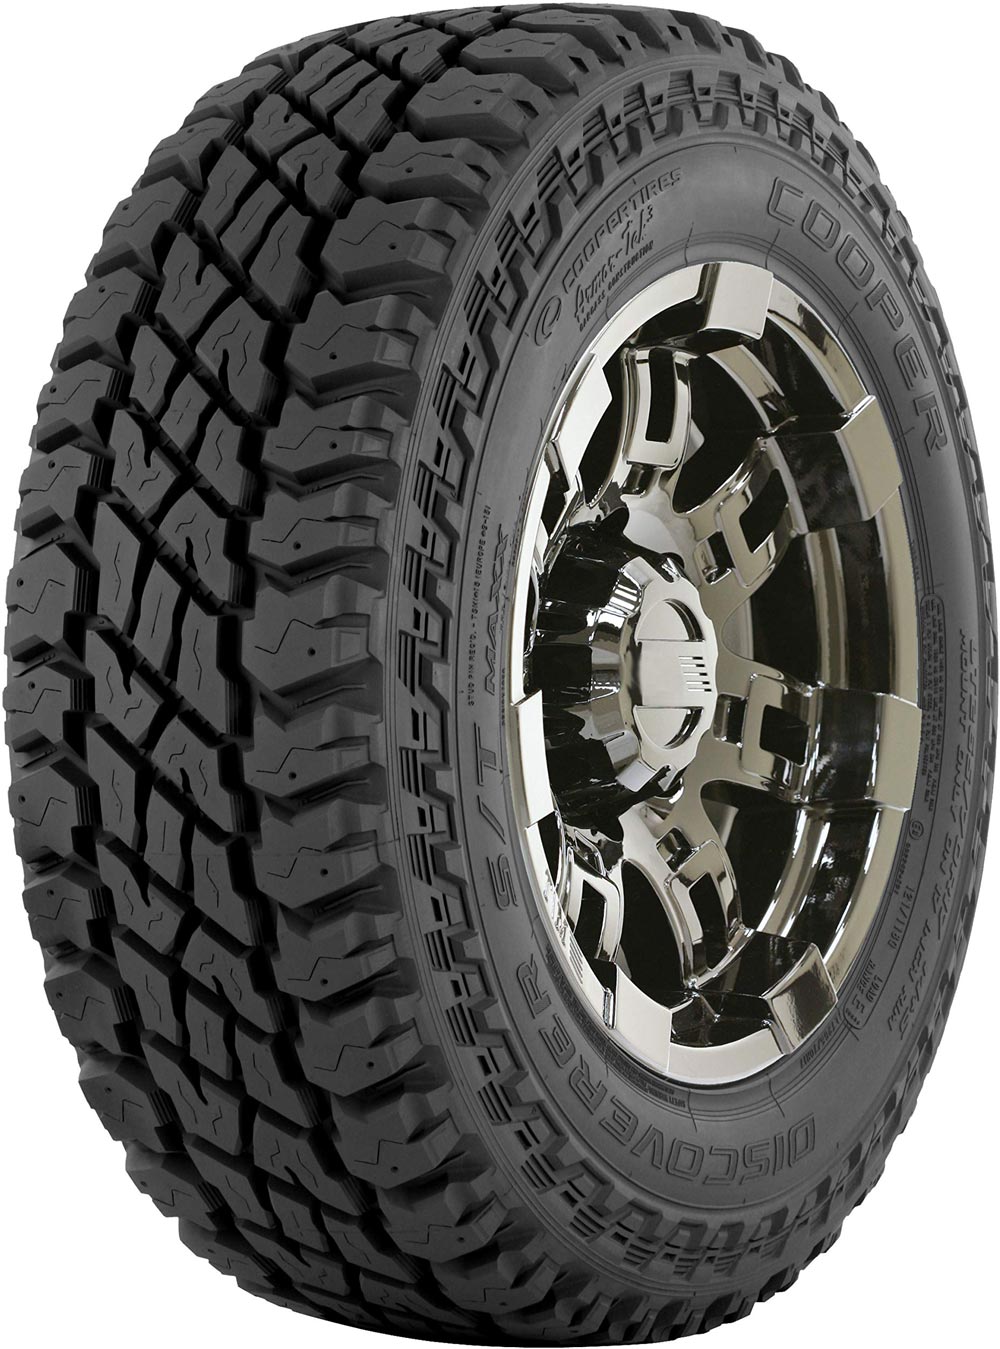 COOPER DISCOVERER ST MAXX P O BSW 265/60 R20 121Q